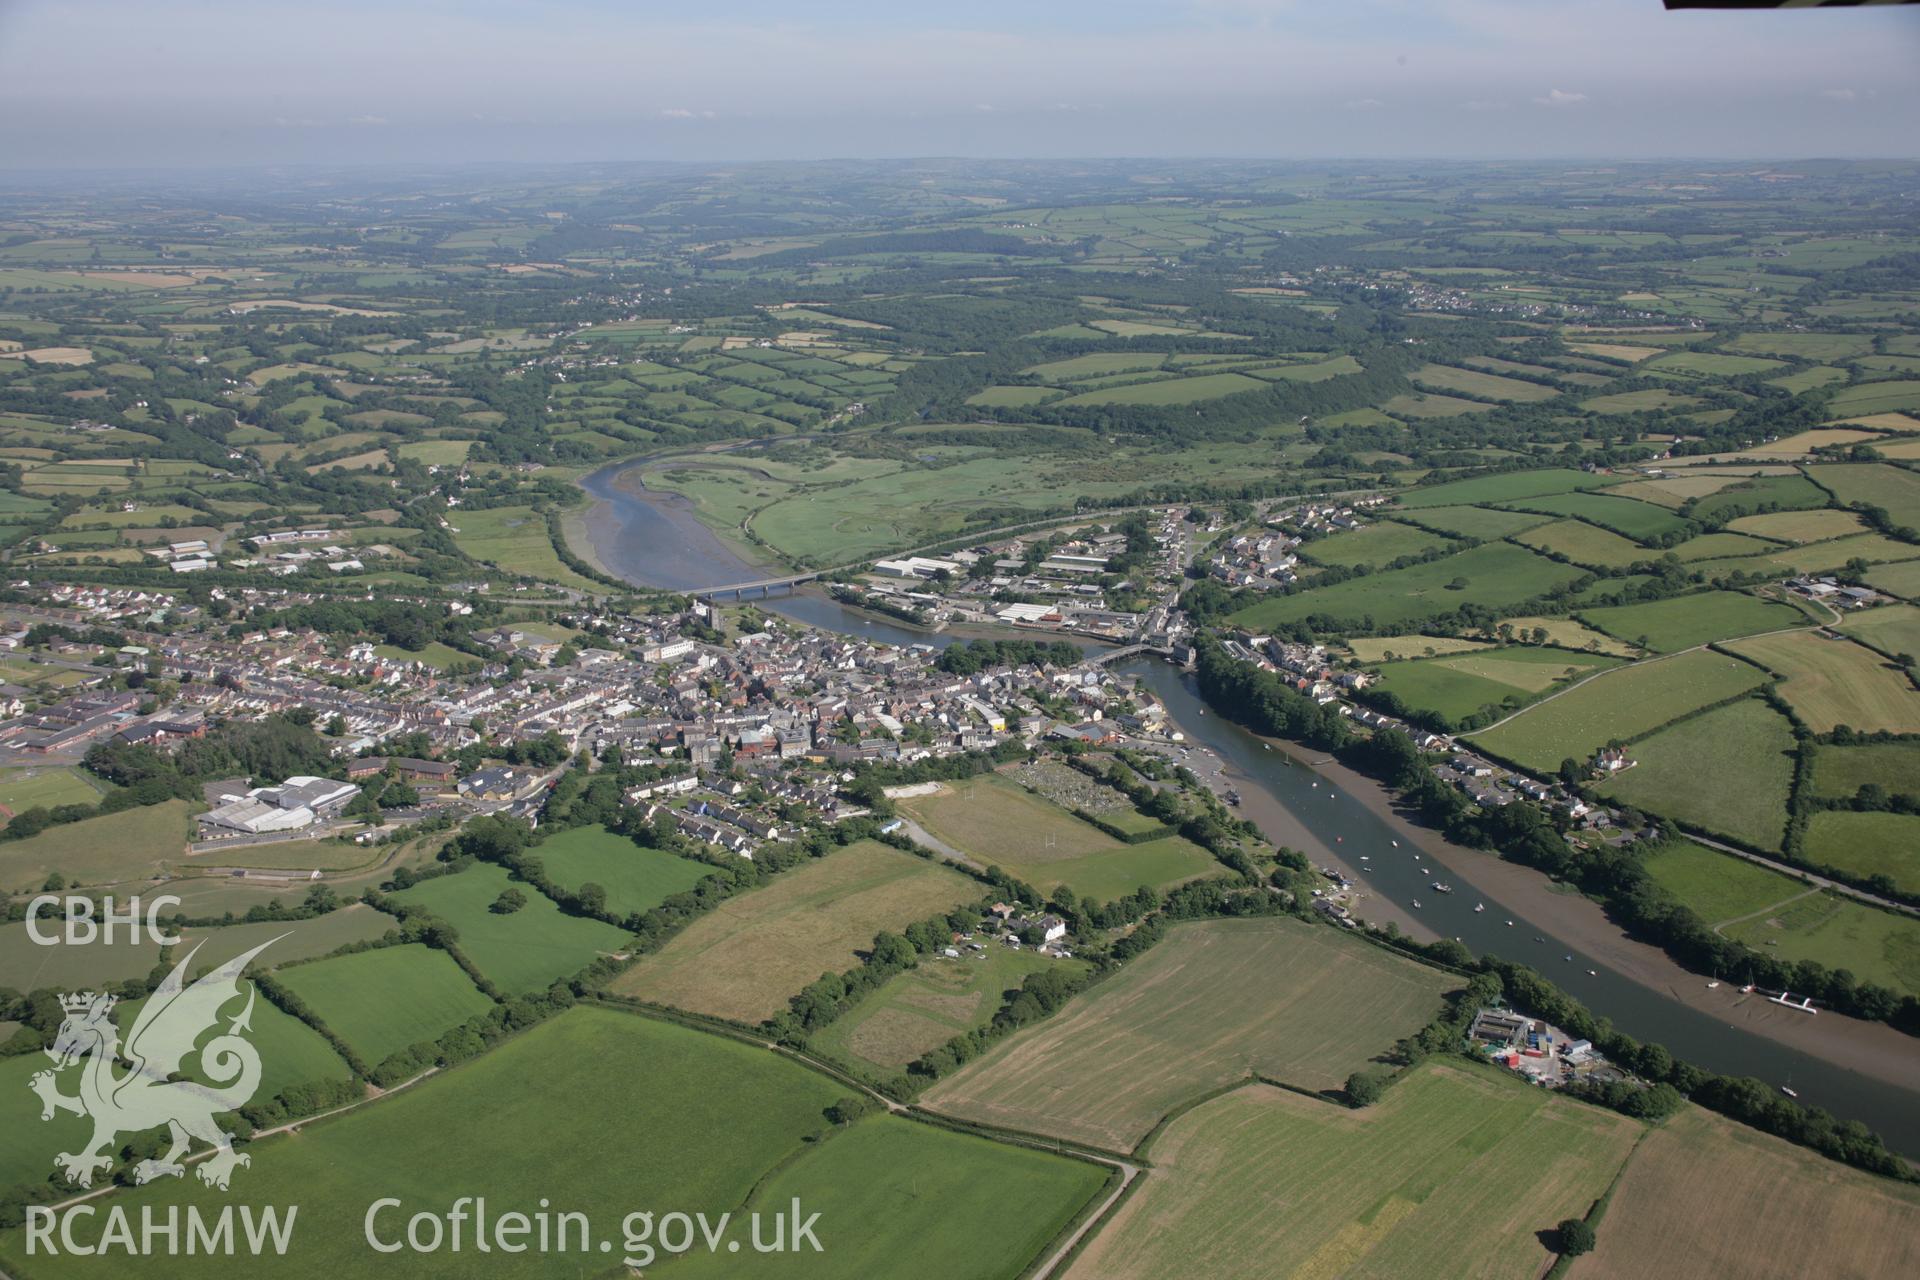 RCAHMW colour oblique aerial photograph of Cardigan from the north-west. Taken on 23 June 2005 by Toby Driver